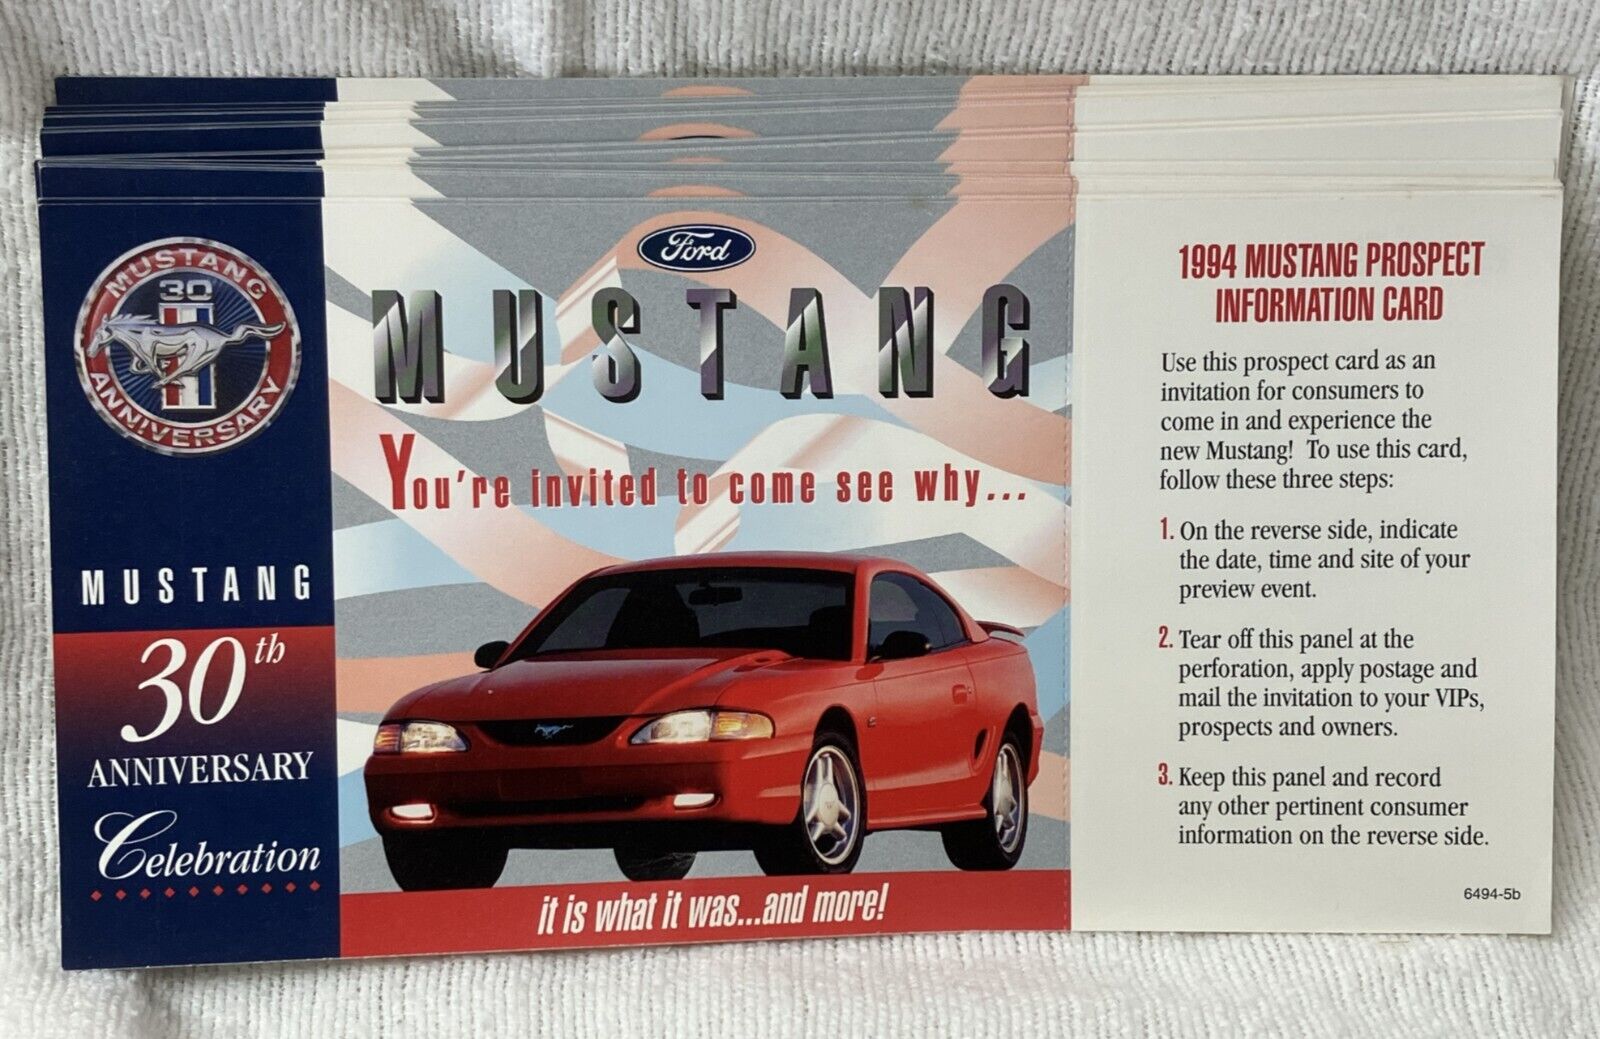 Ford Mustang 30th Anniversary Celebration Registration Card